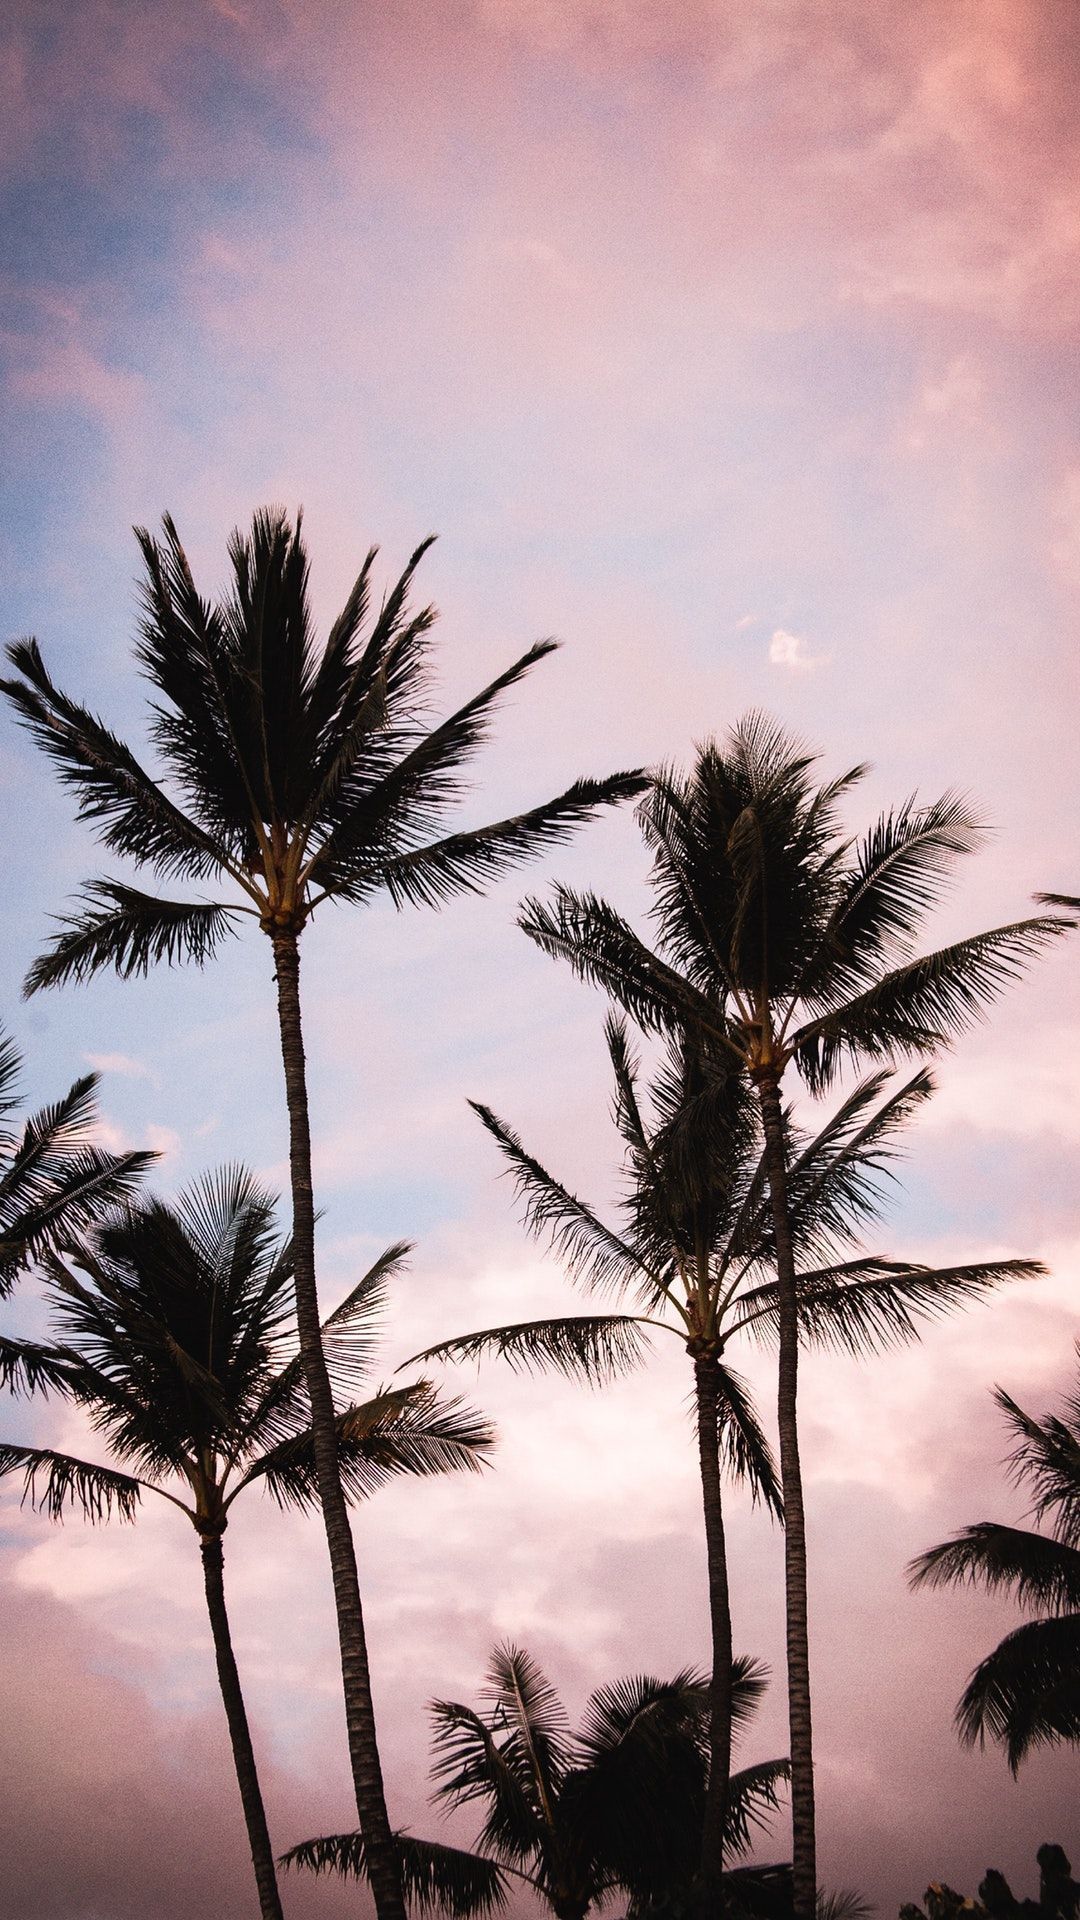 Aesthetic Palm Trees iPhone Wallpaper Free Aesthetic Palm Trees iPhone Background